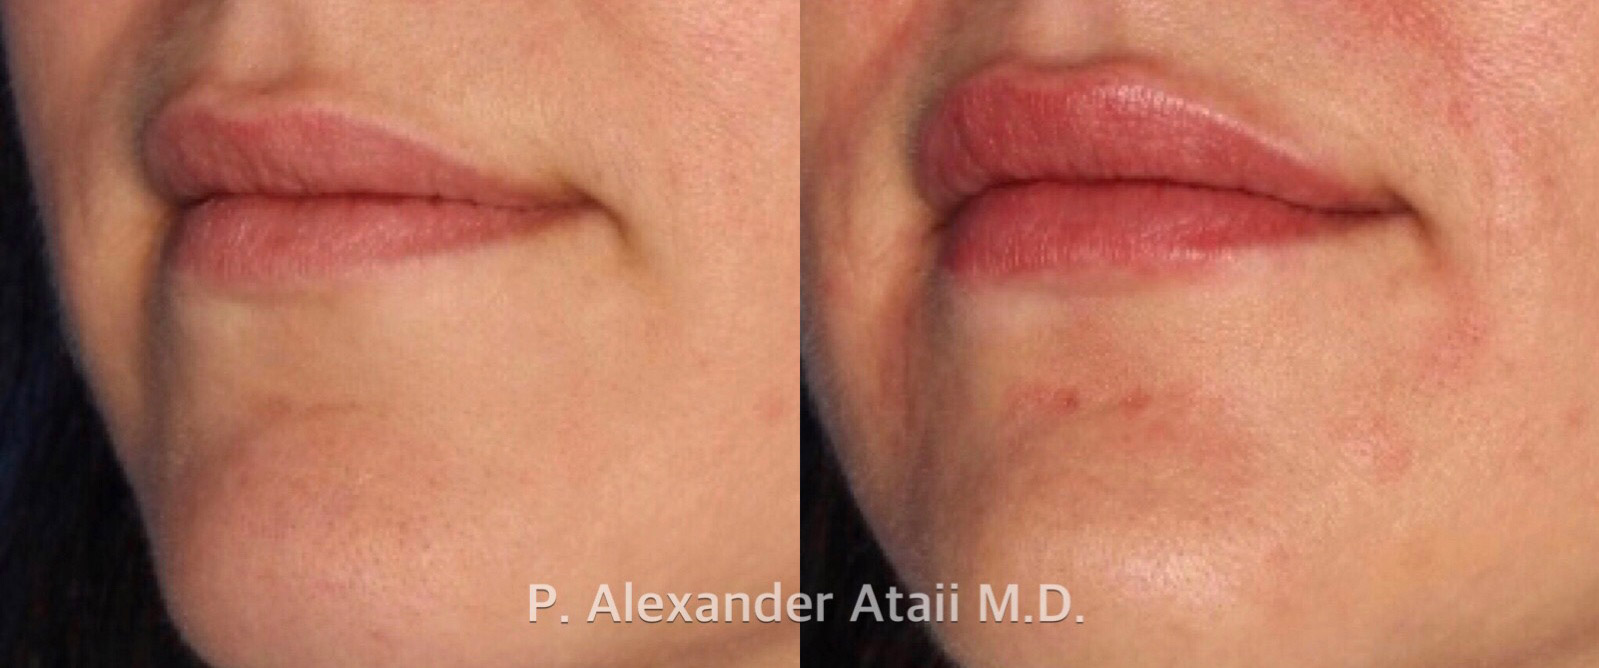 Lip Augmentation Gallery Before & After Gallery - Patient 24560981 - Image 3